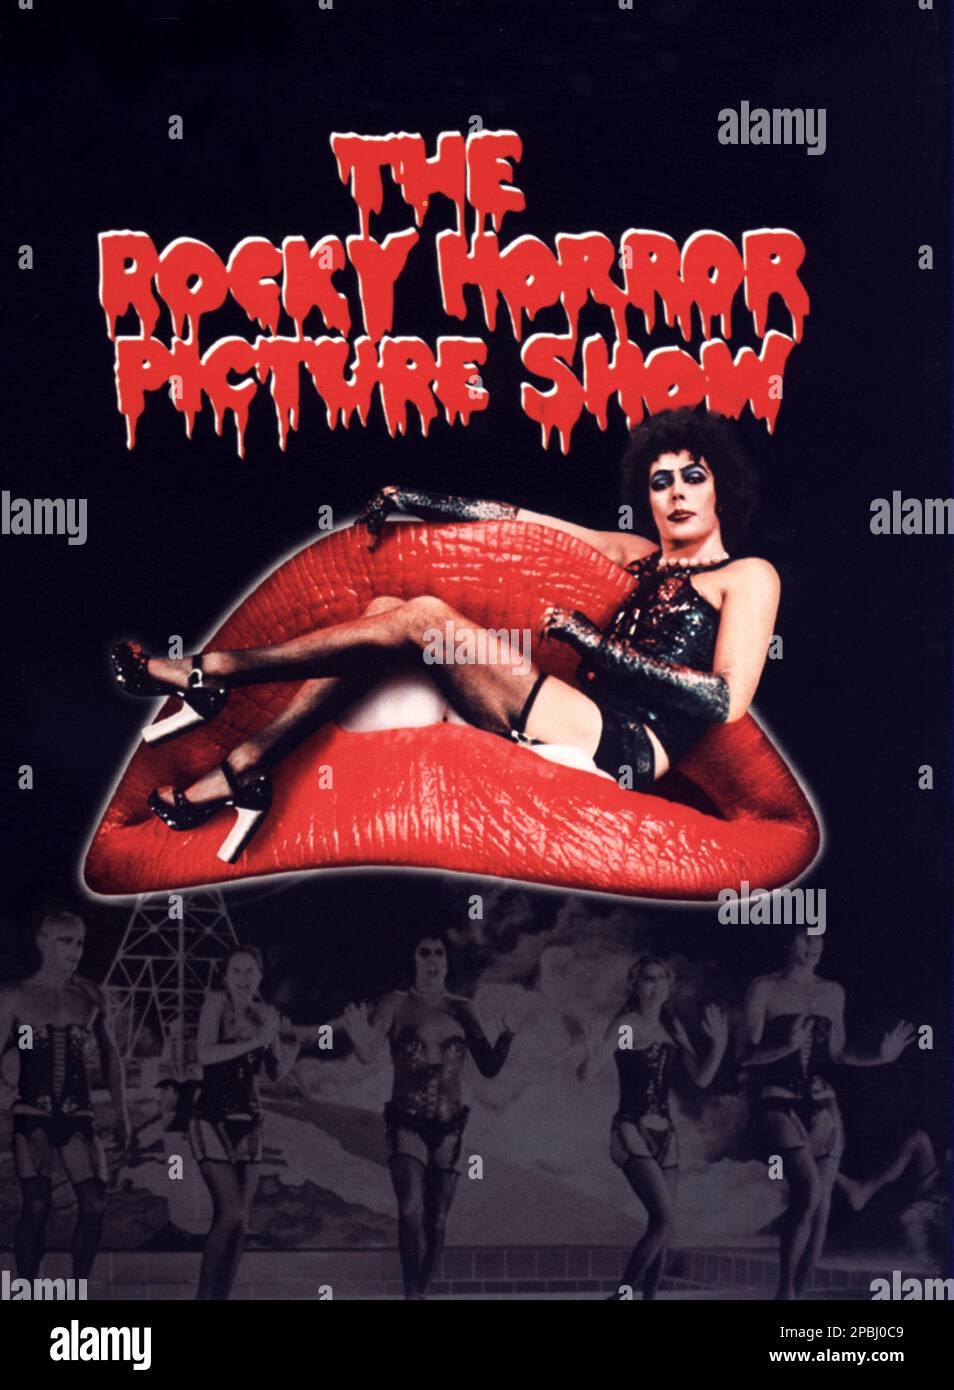 1975 : The italian poster advertising for the CULT movie THE ROCKY HORROR PICTURE SHOW , by Jim Sharman , with music by Richard O'Brian , with TIM CURRY , Susan sarandon , Barry Bostwick, Meat Loaf - FILM - CINEMA   - poster pubblicitario - poster - advertising - locandina - bocca - mouth - labbra rosse - red lips - guepiere - tacchi - wheels - scarpe - shoes - GAY - HOMOSEXUAL - HOMOSEXUALITY - OMOSESSUALE - omosessualità - LGBT  - Bisexuality - Bisessualita' - transvestite - travestito - transgender - trans - GLTB - MUSICAL ----  NOT FOR ADVERTISING PUBBLICITARY USE ---- NON PER USO PUBBLICI Stock Photo